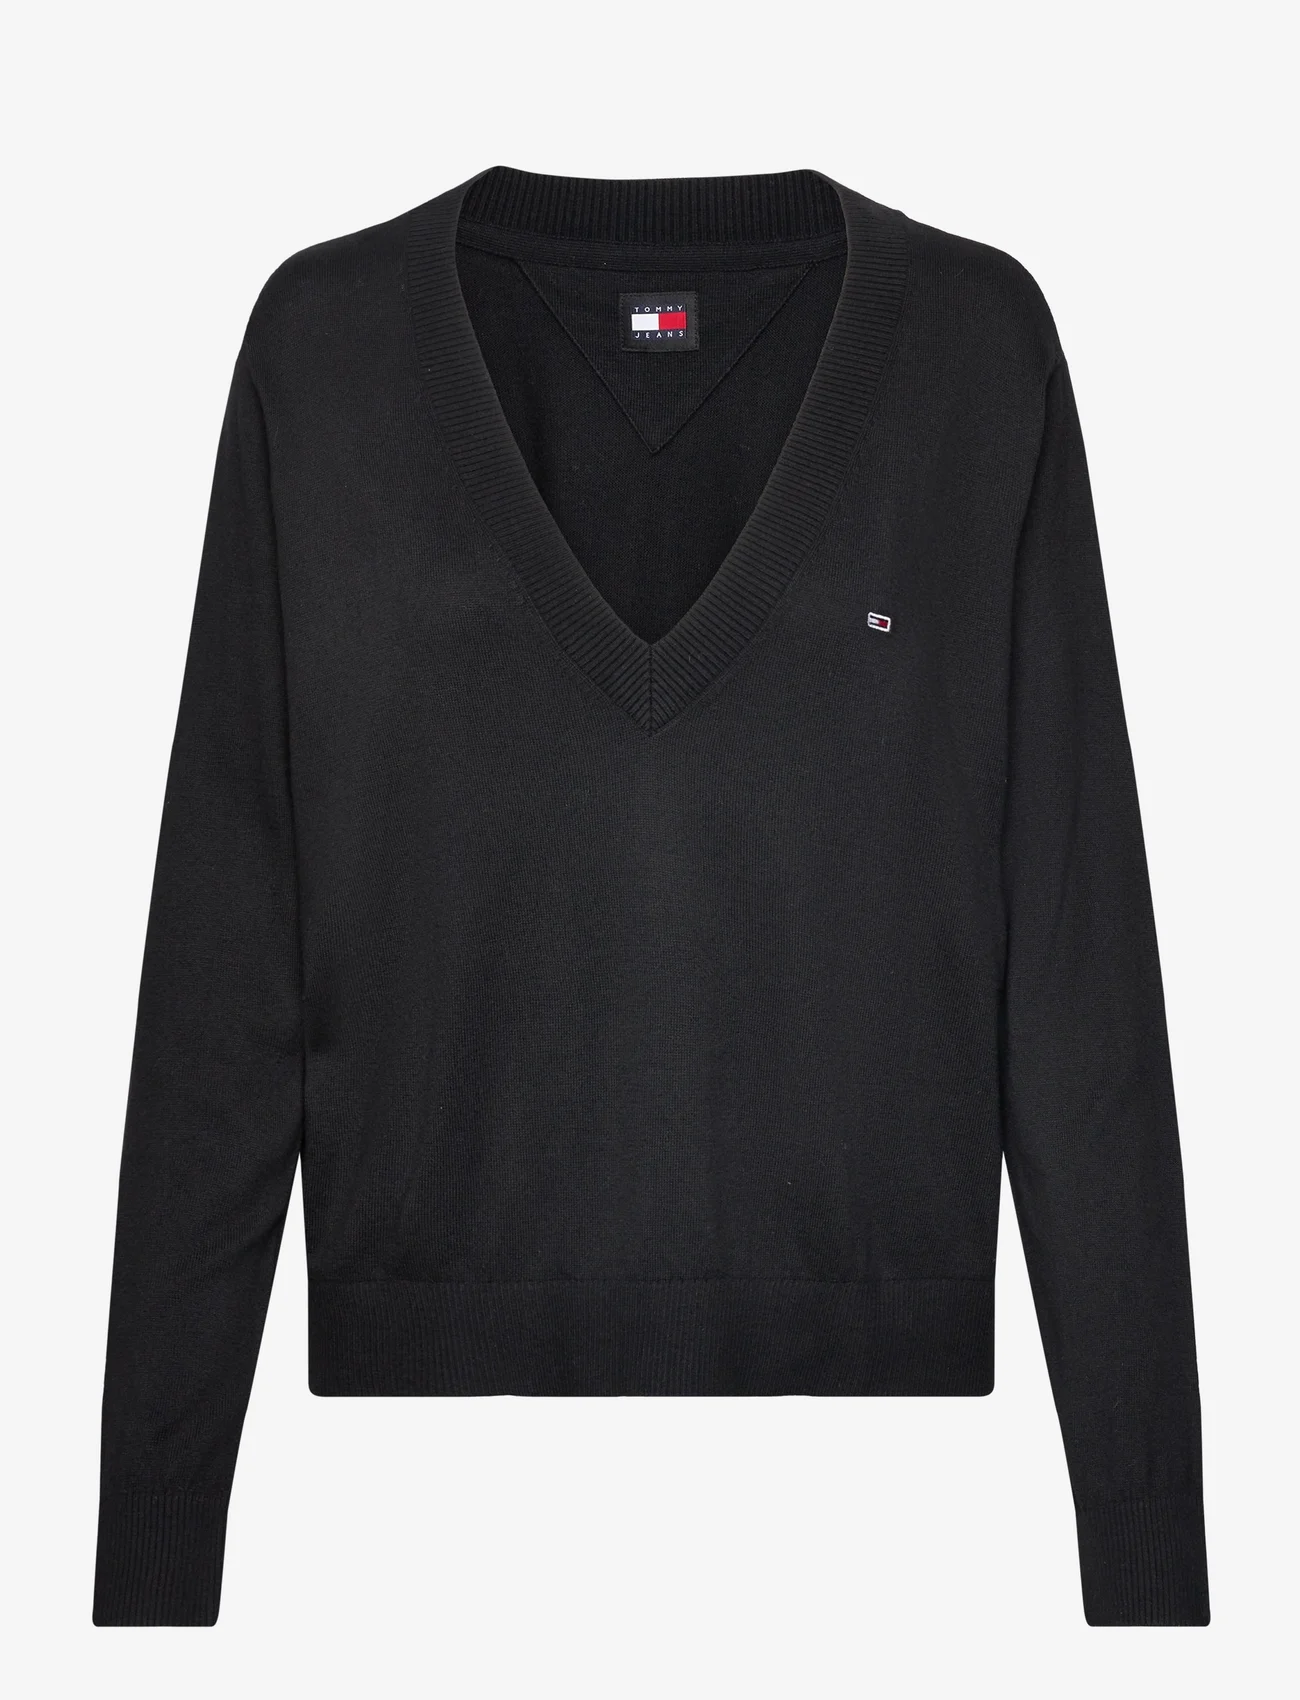 Tommy Jeans - TJW ESSENTIAL VNECK SWEATER EXT - neulepuserot - black - 0